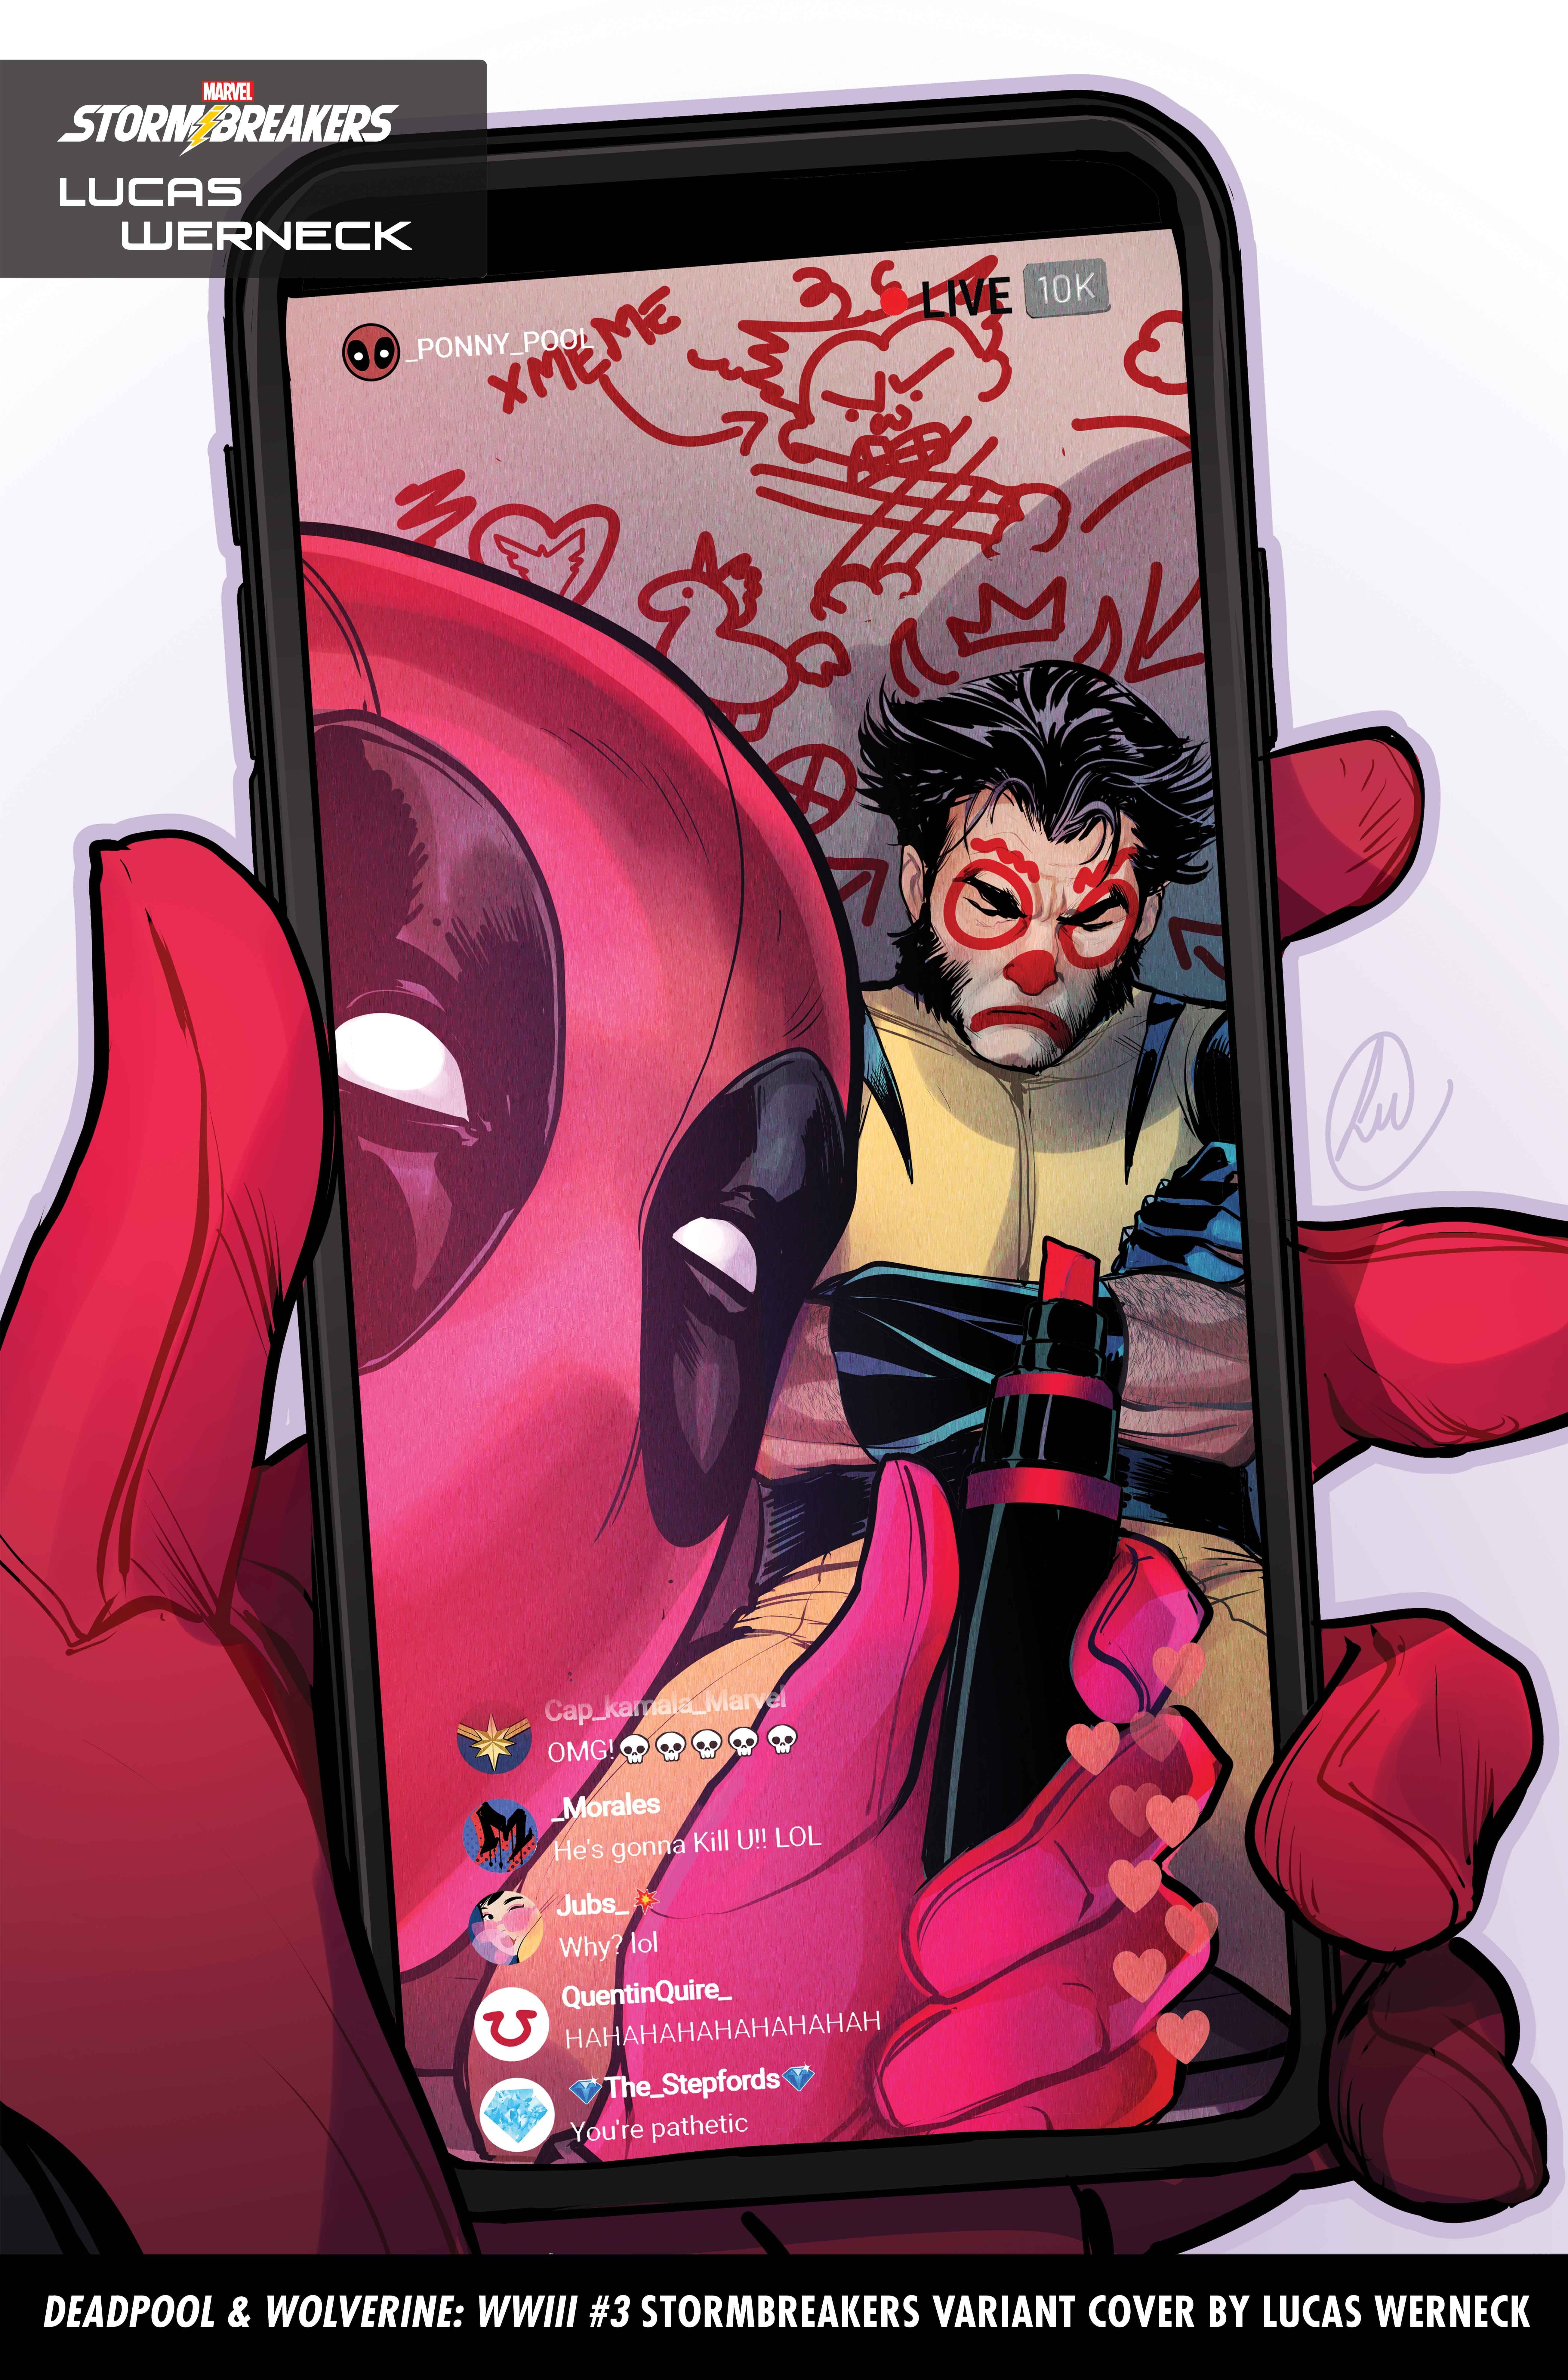 DEADPOOL & WOLVERINE WWIII #3 Stormbreakers Variant Cover by Lucas Werneck